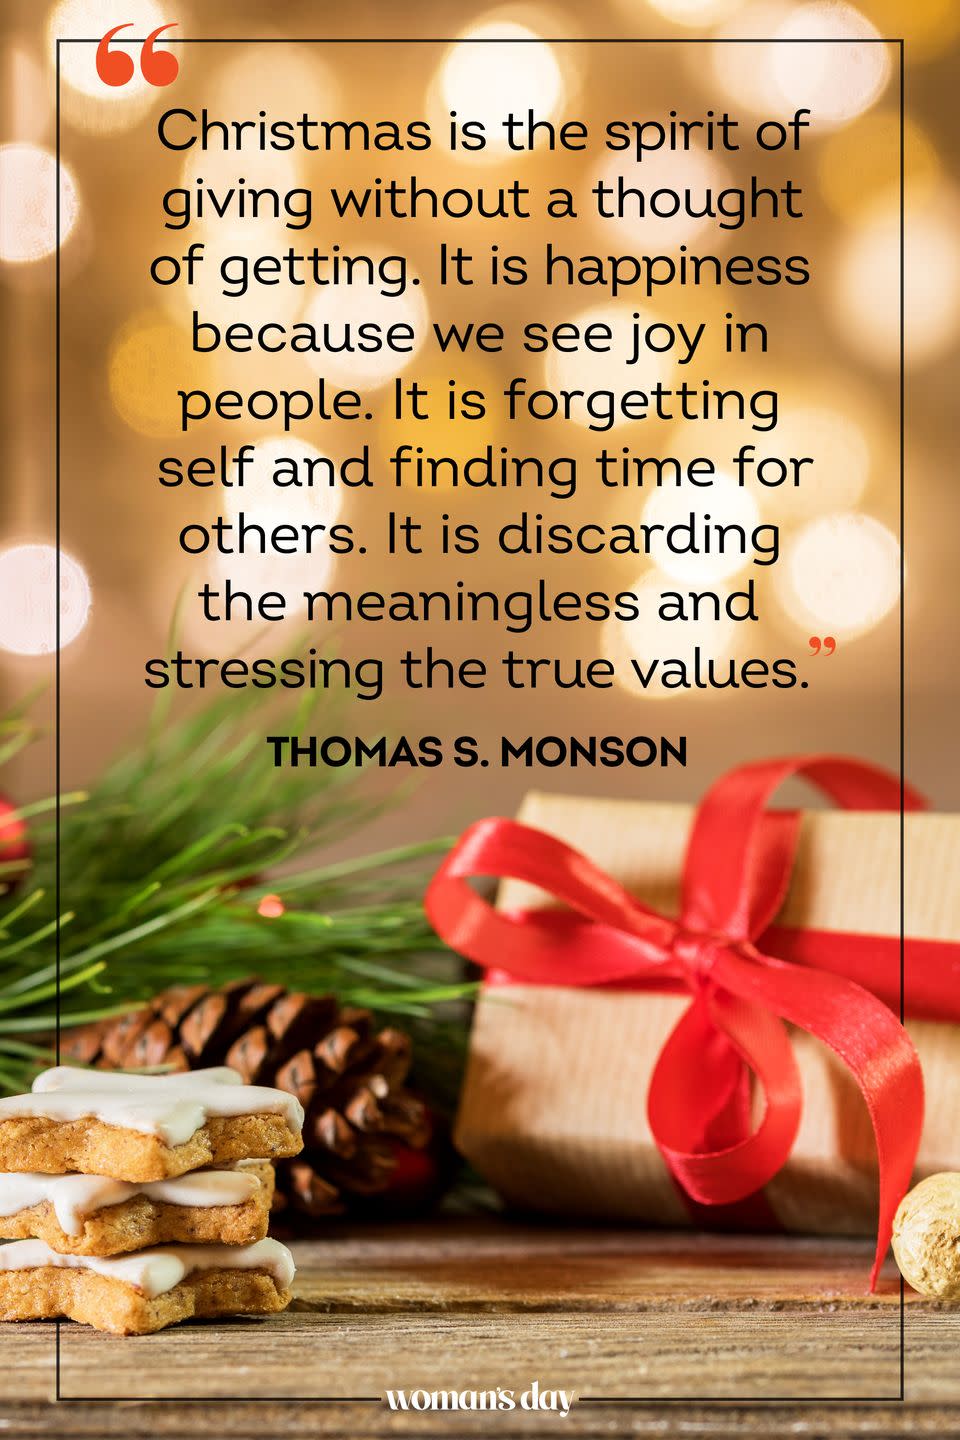 <p>"Christmas is the spirit of giving without a thought of getting. It is happiness because we see joy in people. It is forgetting self and finding time for others. It is discarding the meaningless and stressing the true values." — Thomas S. Monson</p>